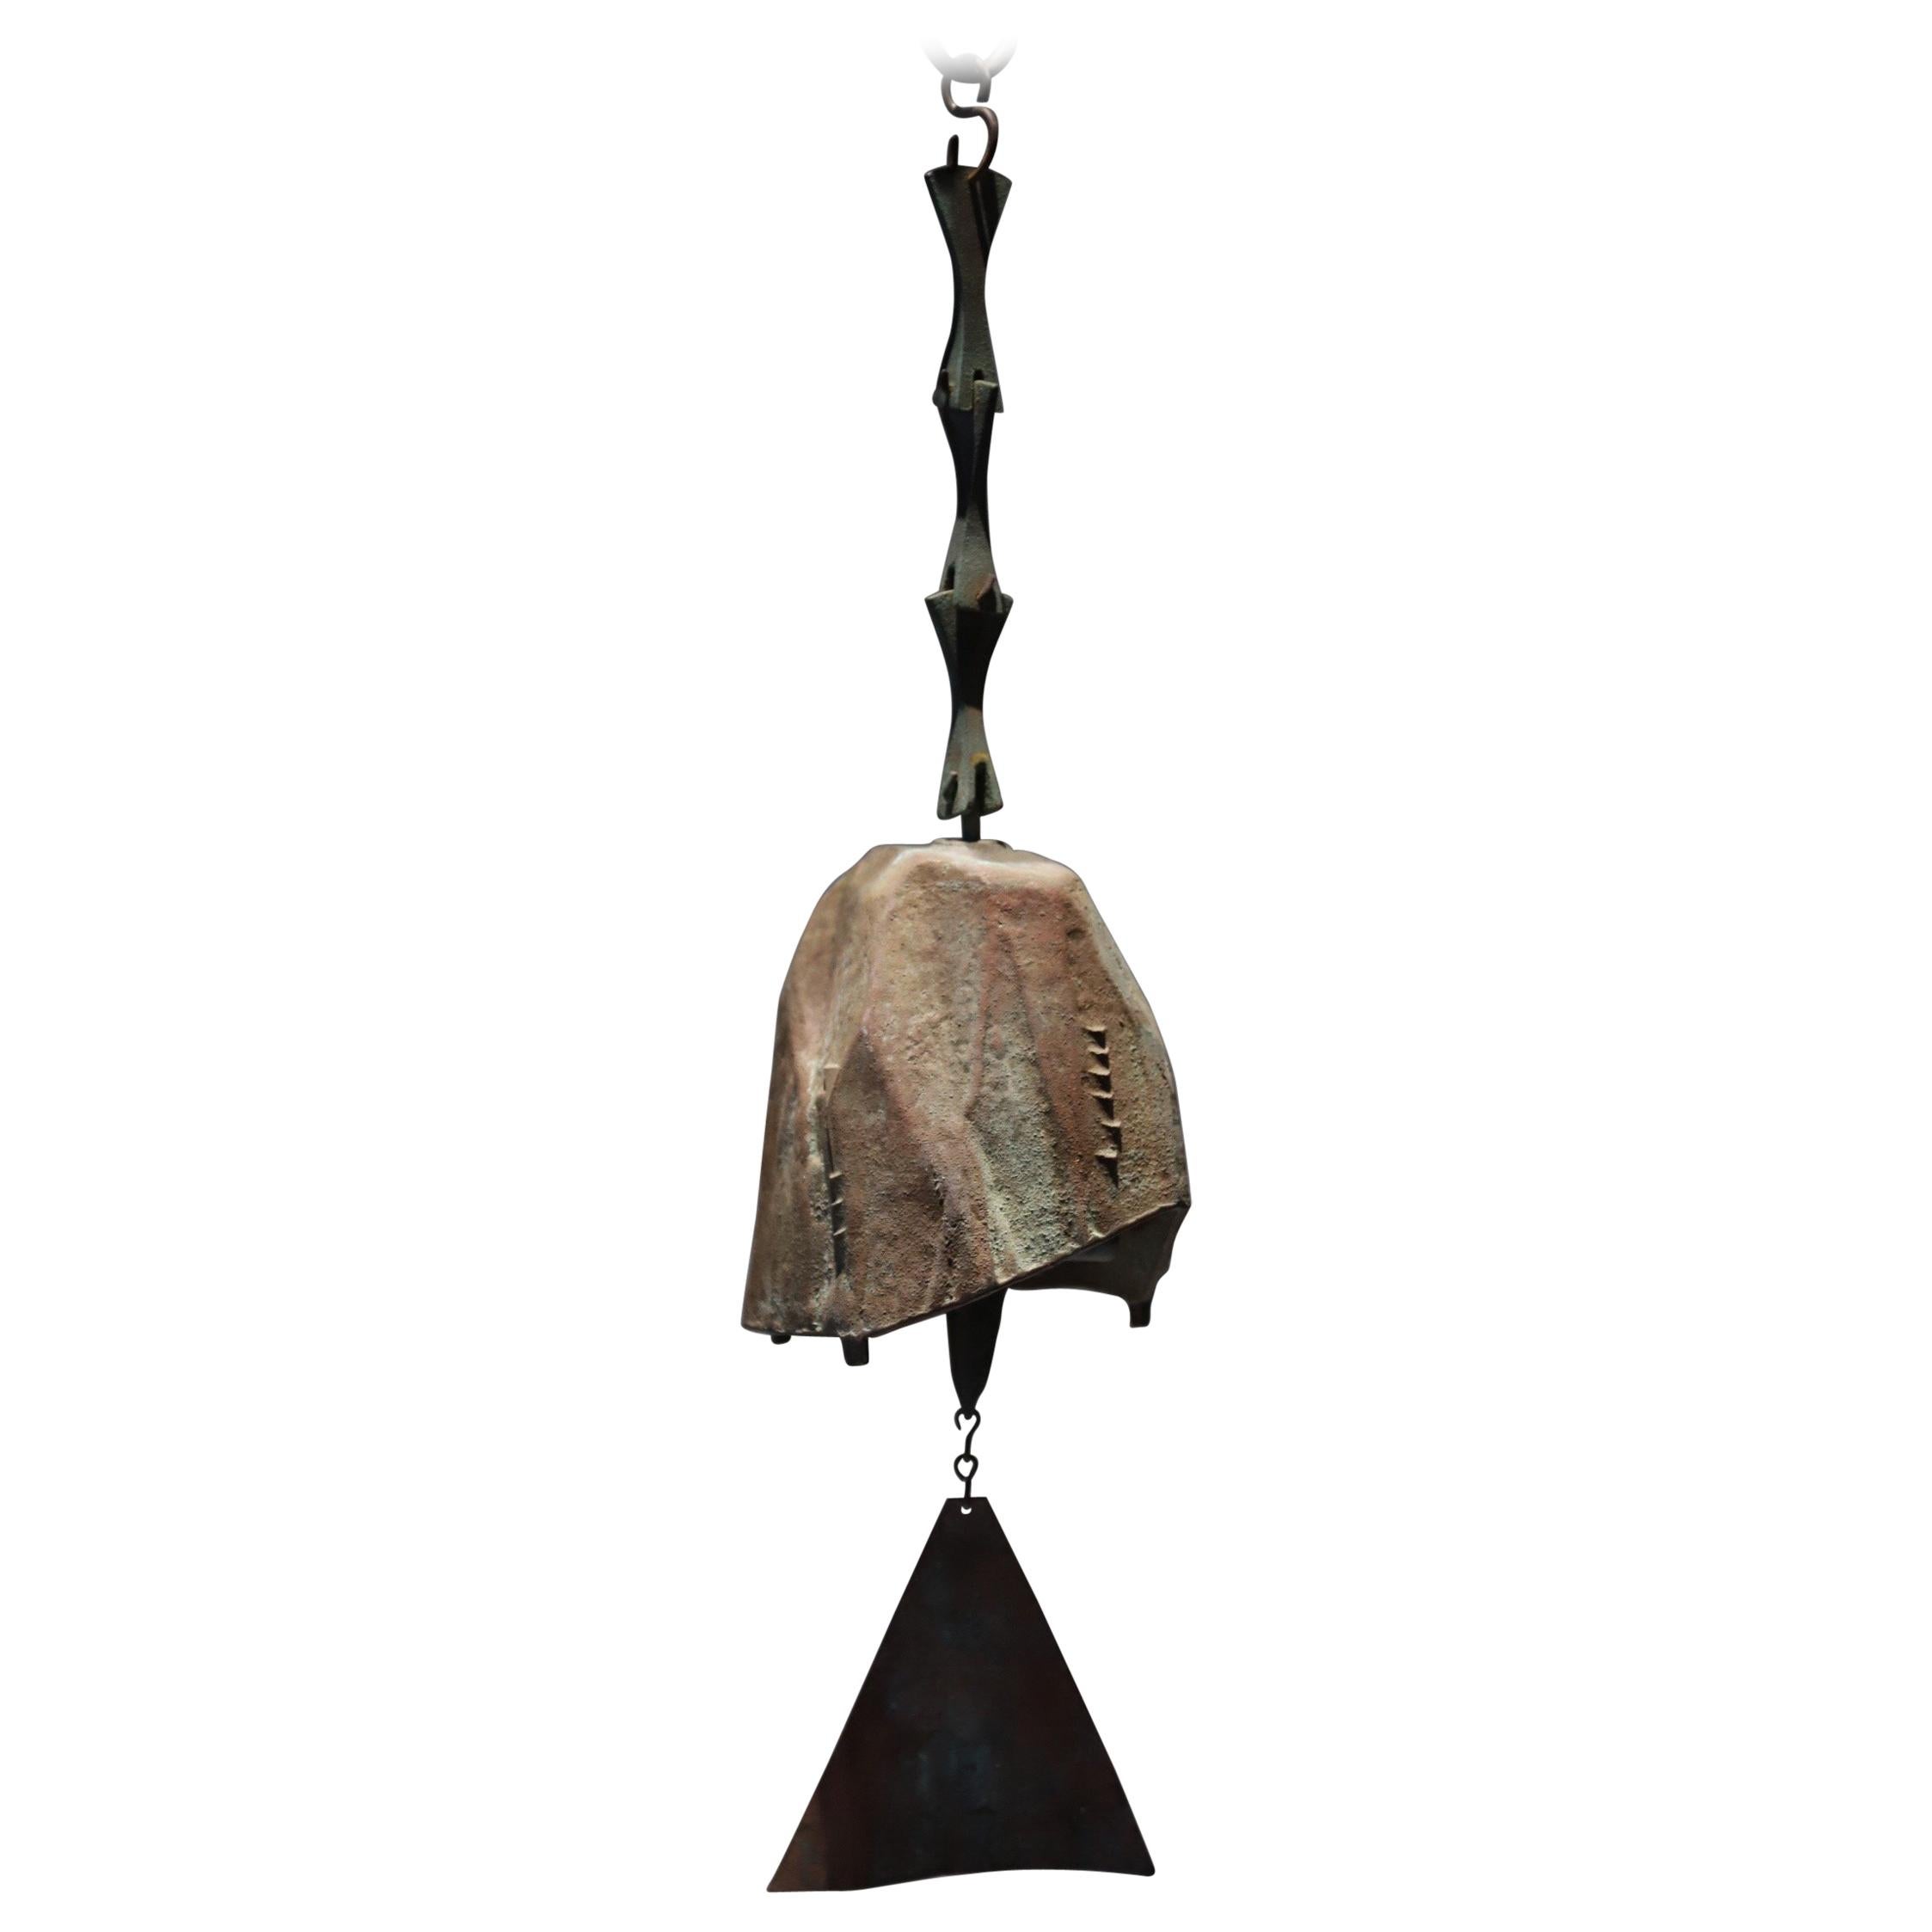 Details about   Arcosanti Soleri 9" Patina Replacement Hanging Chain for Large Bronze Wind Bell